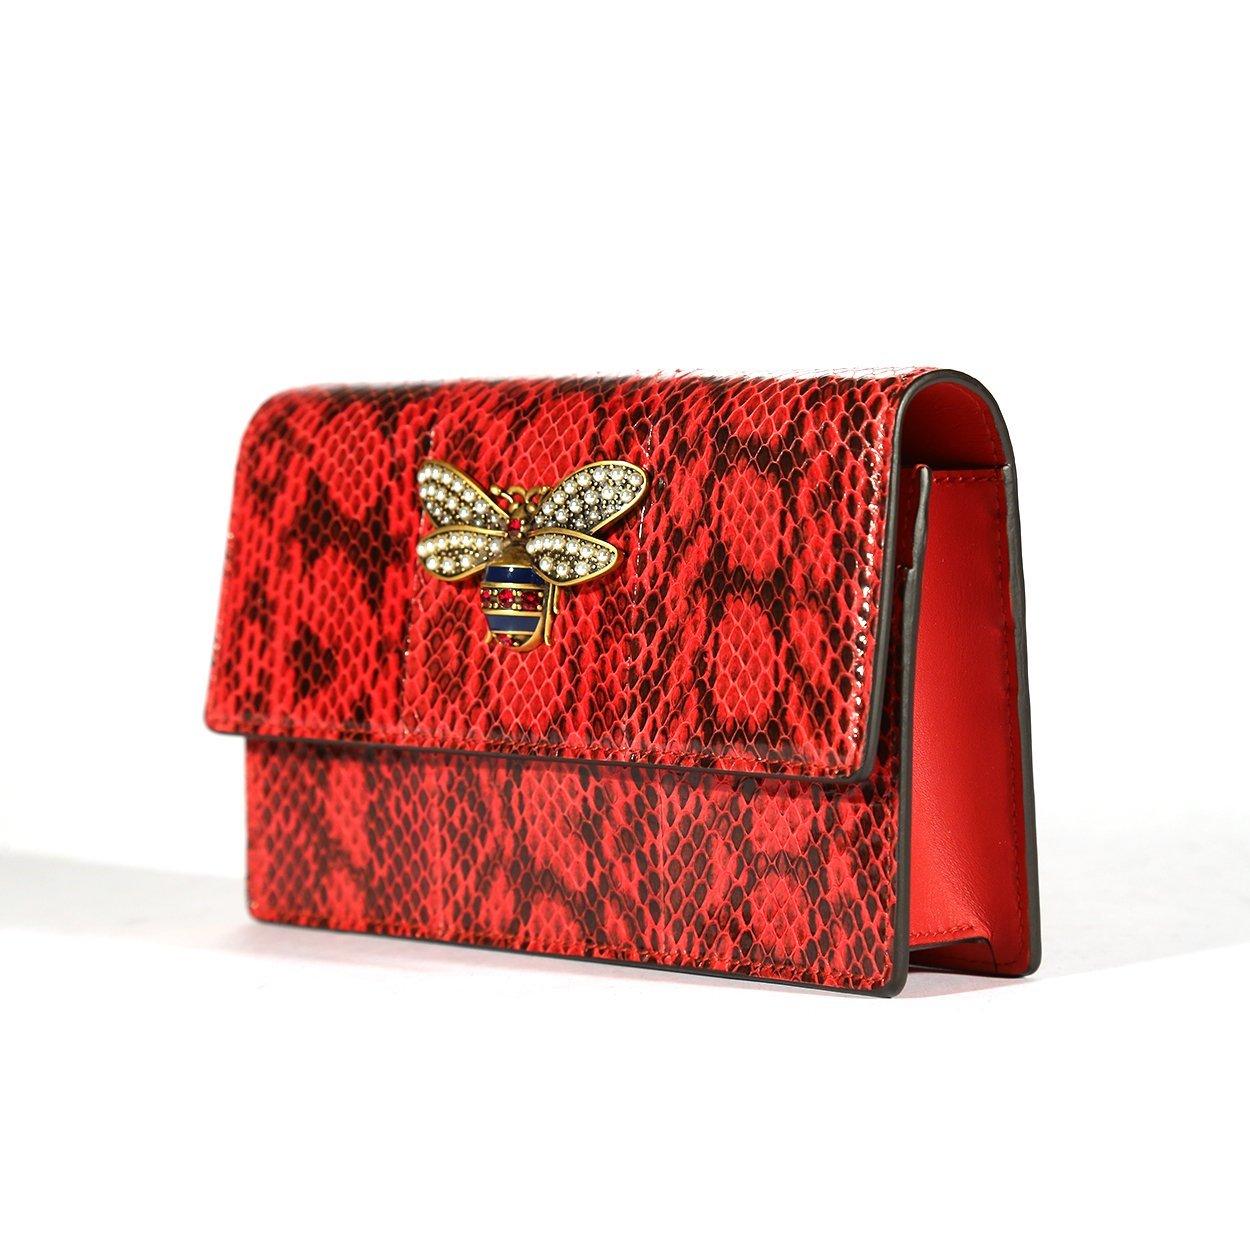 Hard To Find Brand New w/Box Louis Vuitton Red Exotic Snakeskin